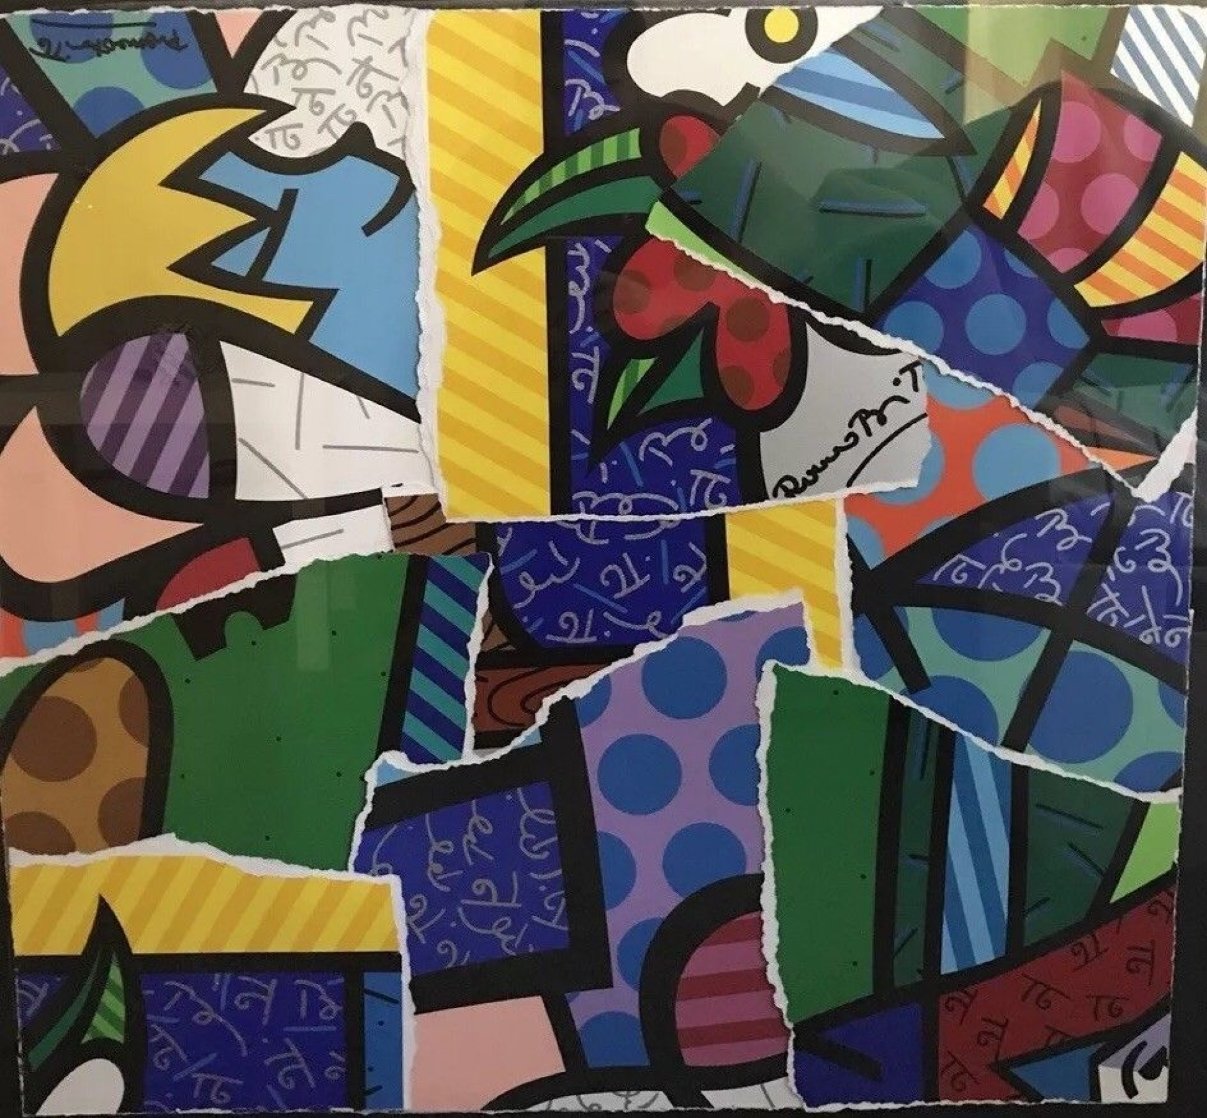 Britto MIX 2004 30x32 Works on Paper (not prints) by Romero Britto